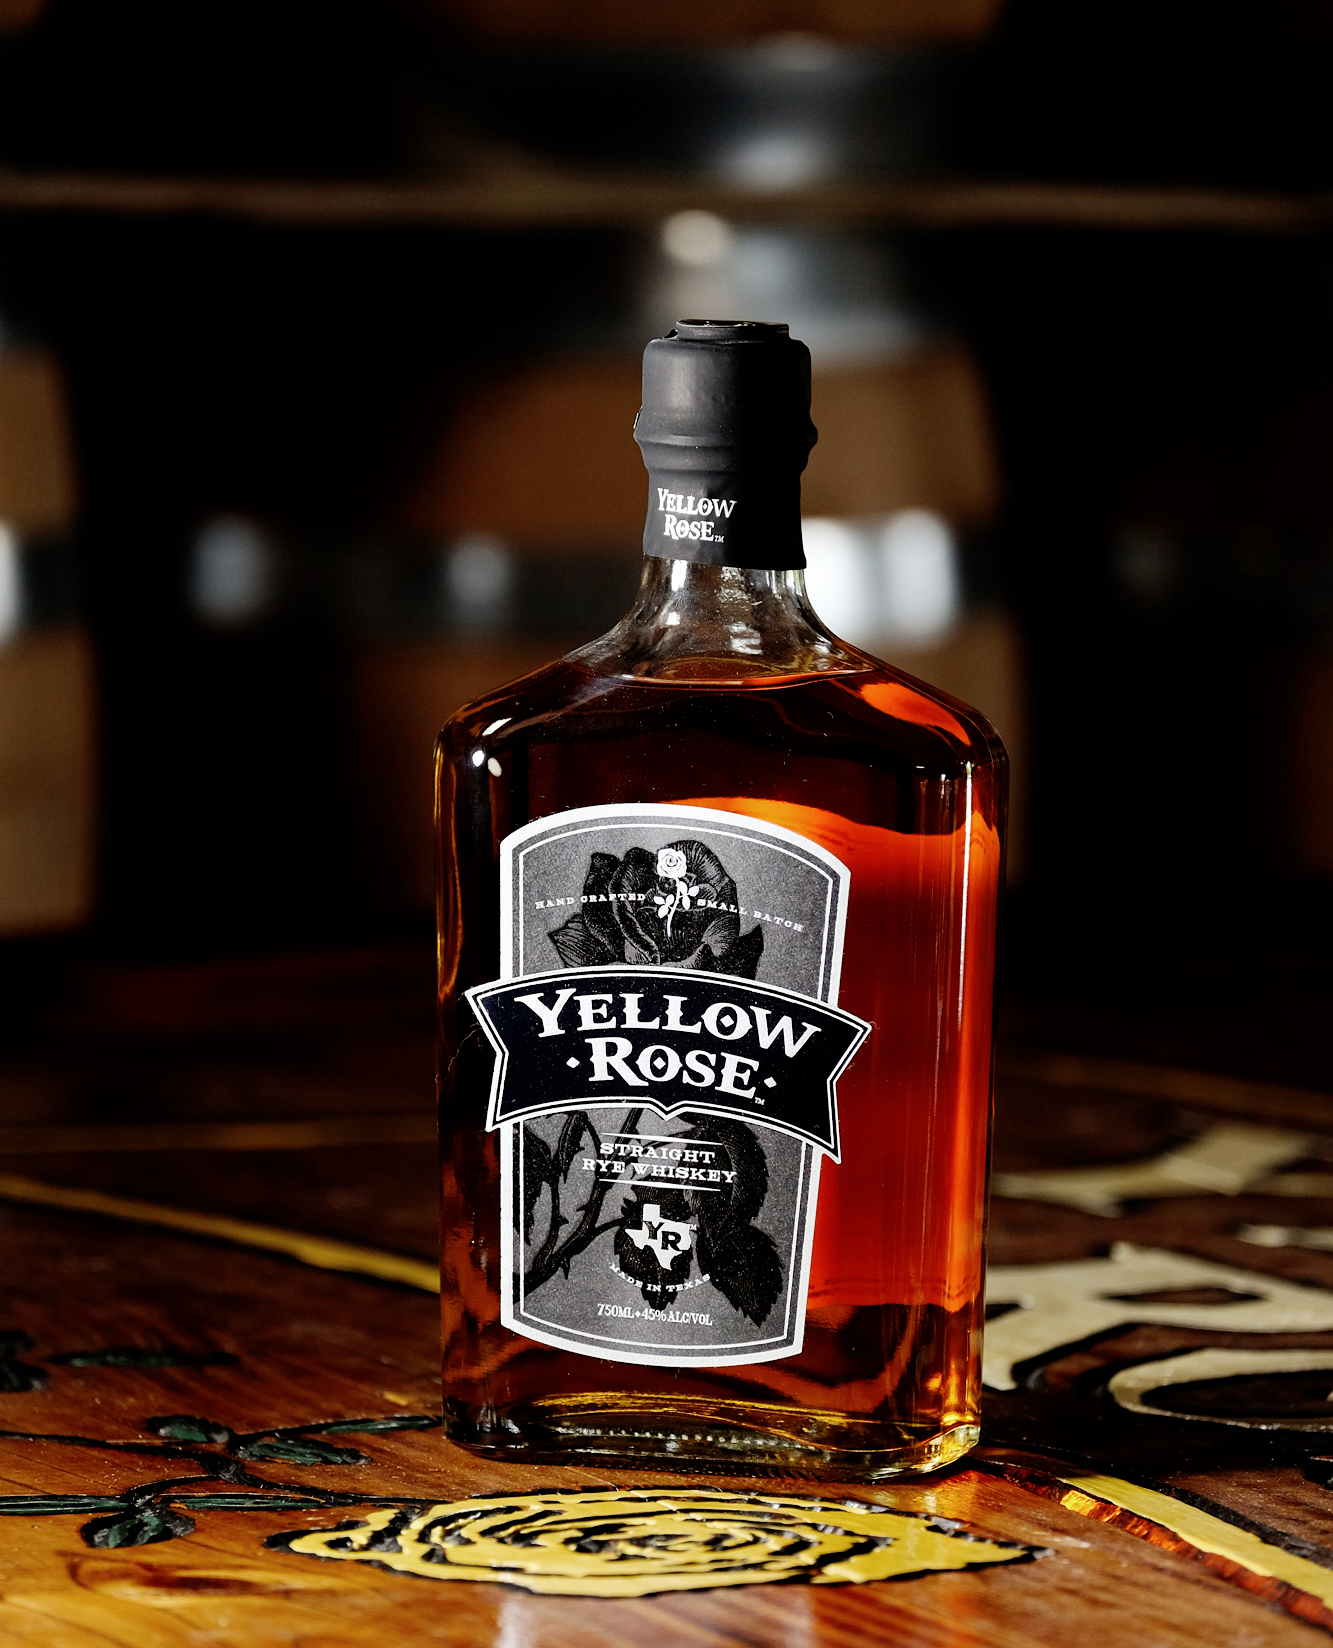 Yellow Rose Straight Rye Whiskey, which was given a score of 96  and awards for being both a Finalist and Great Value at the Ultimate Spirits Challenge.